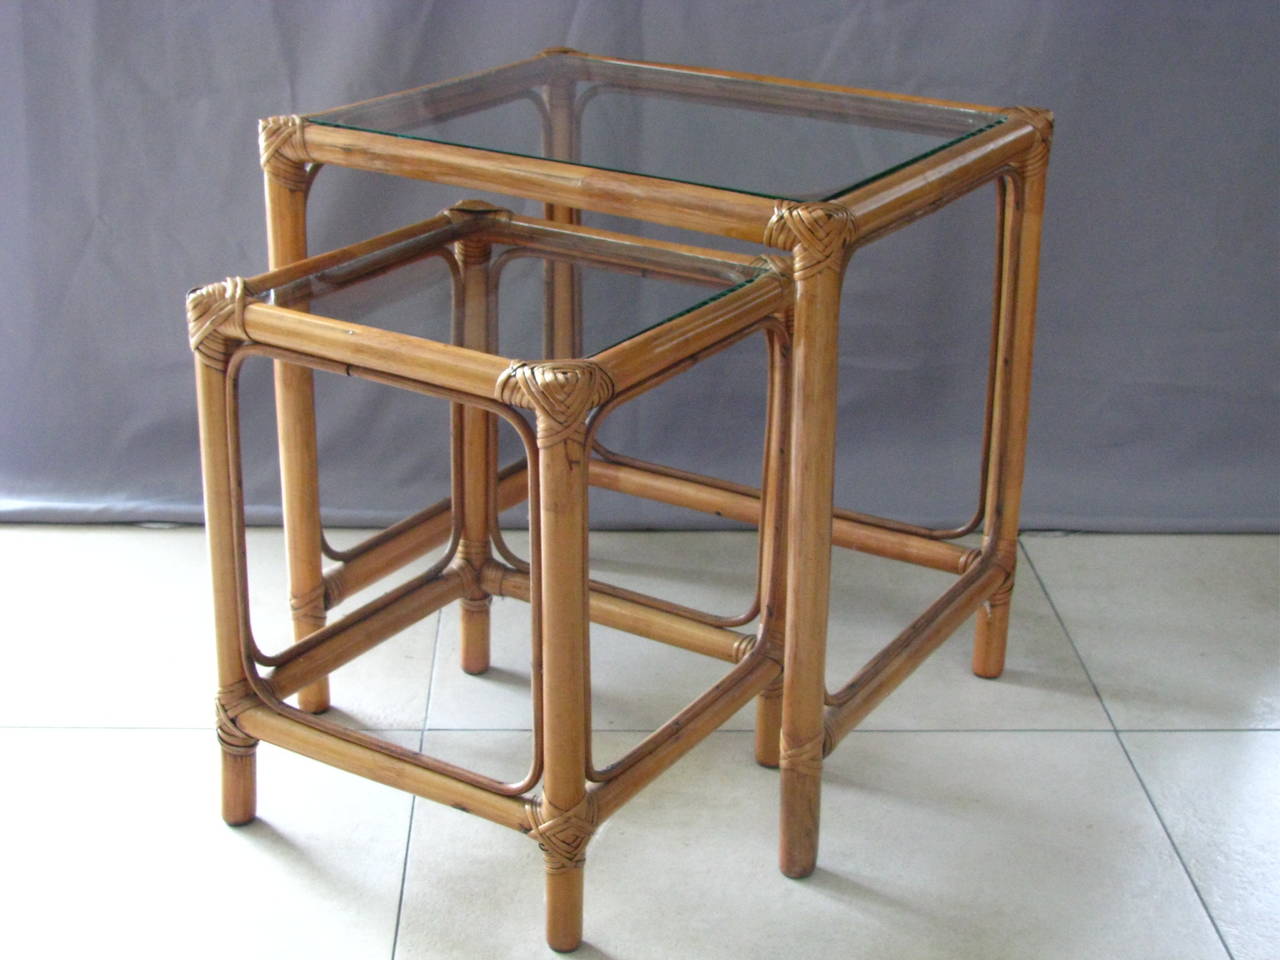 French 1960 rattan side nesting tables with glass tops. Good vintage condition.

Measurements:

Height 20.1 in. (51 cm)
Length 19.7 in. (50 cm)
Width 16.2 in (41 cm).

Note: Timeless material!

